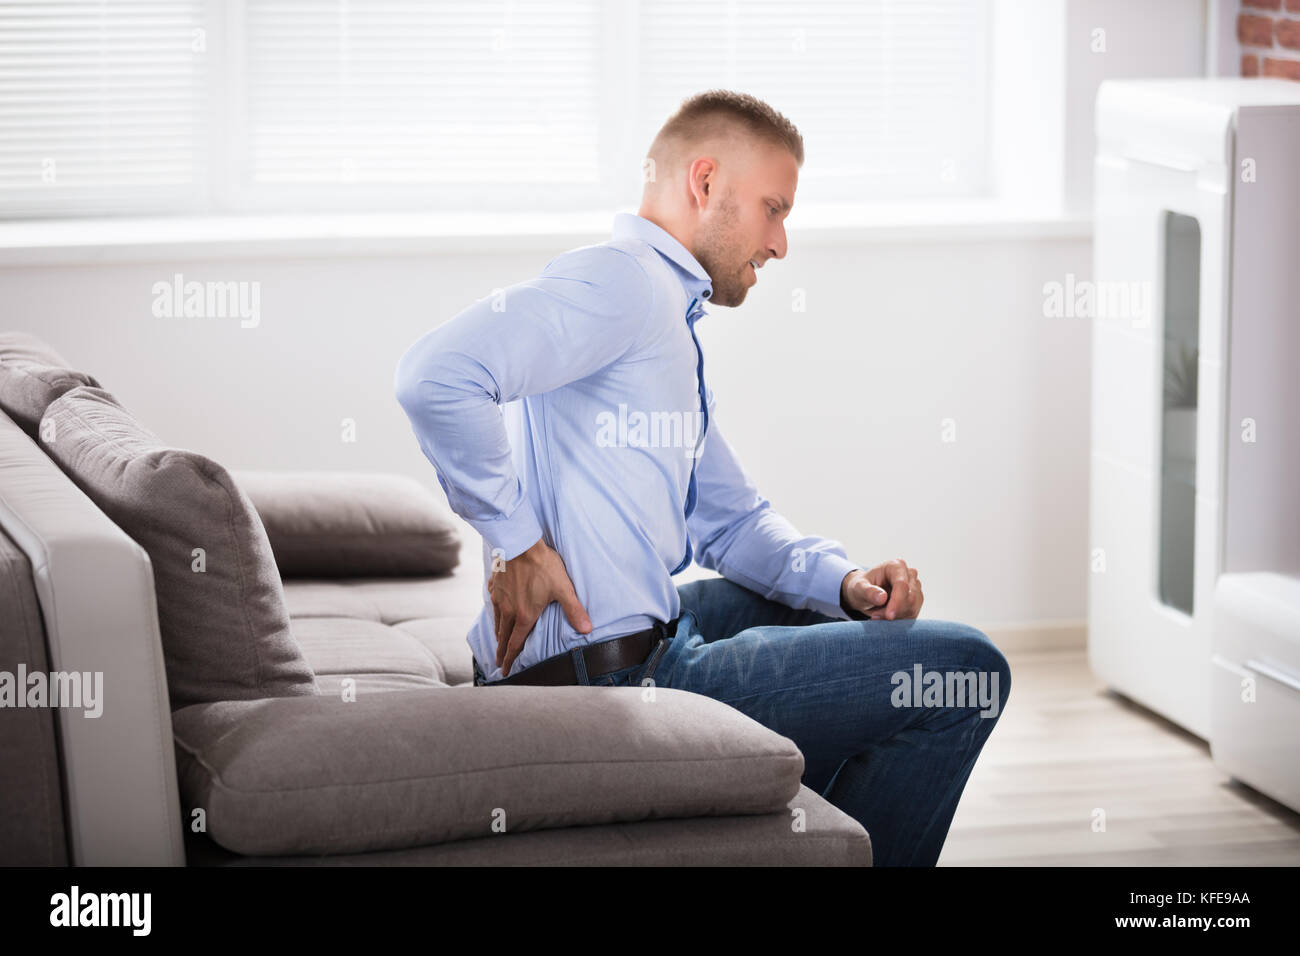 Man Sitting On Sofa Suffering From Back Pain At Home Stock Photo